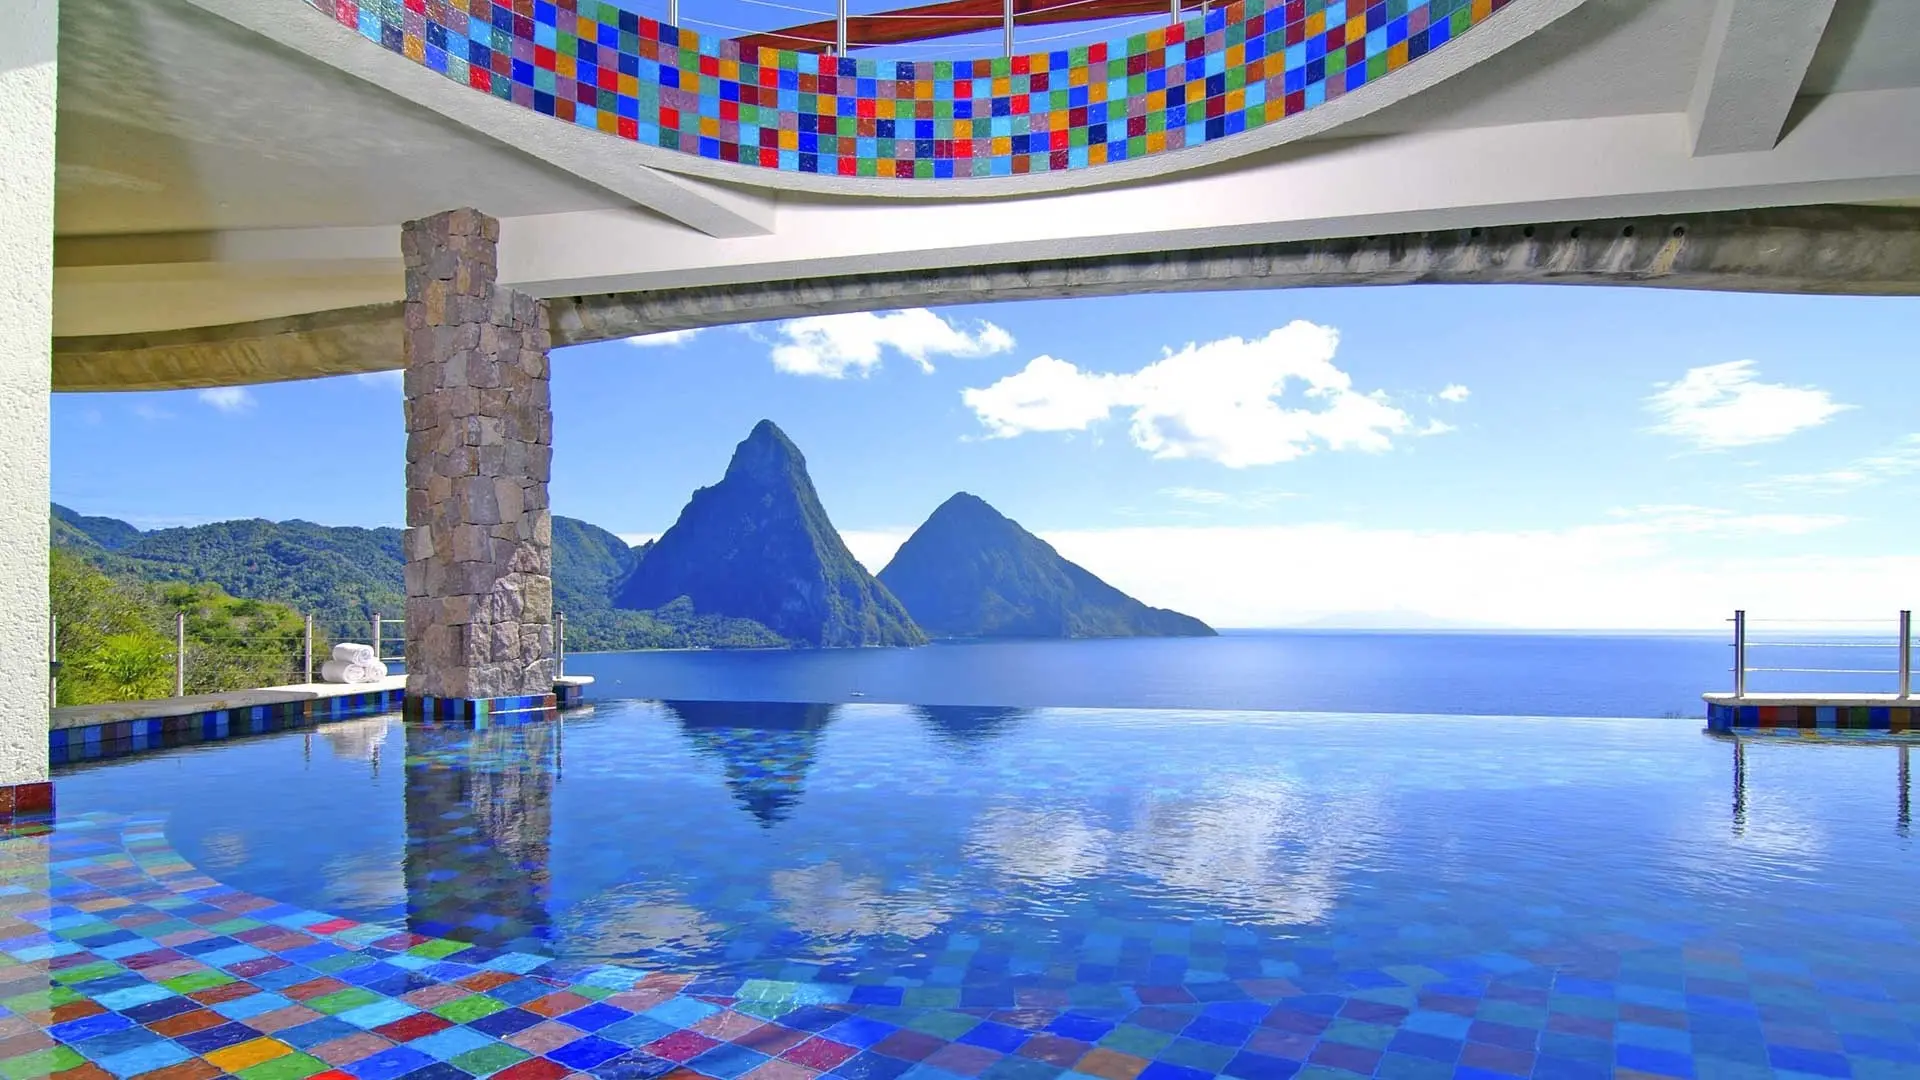 Hotel review Service & Facilities' - Jade Mountain - 5